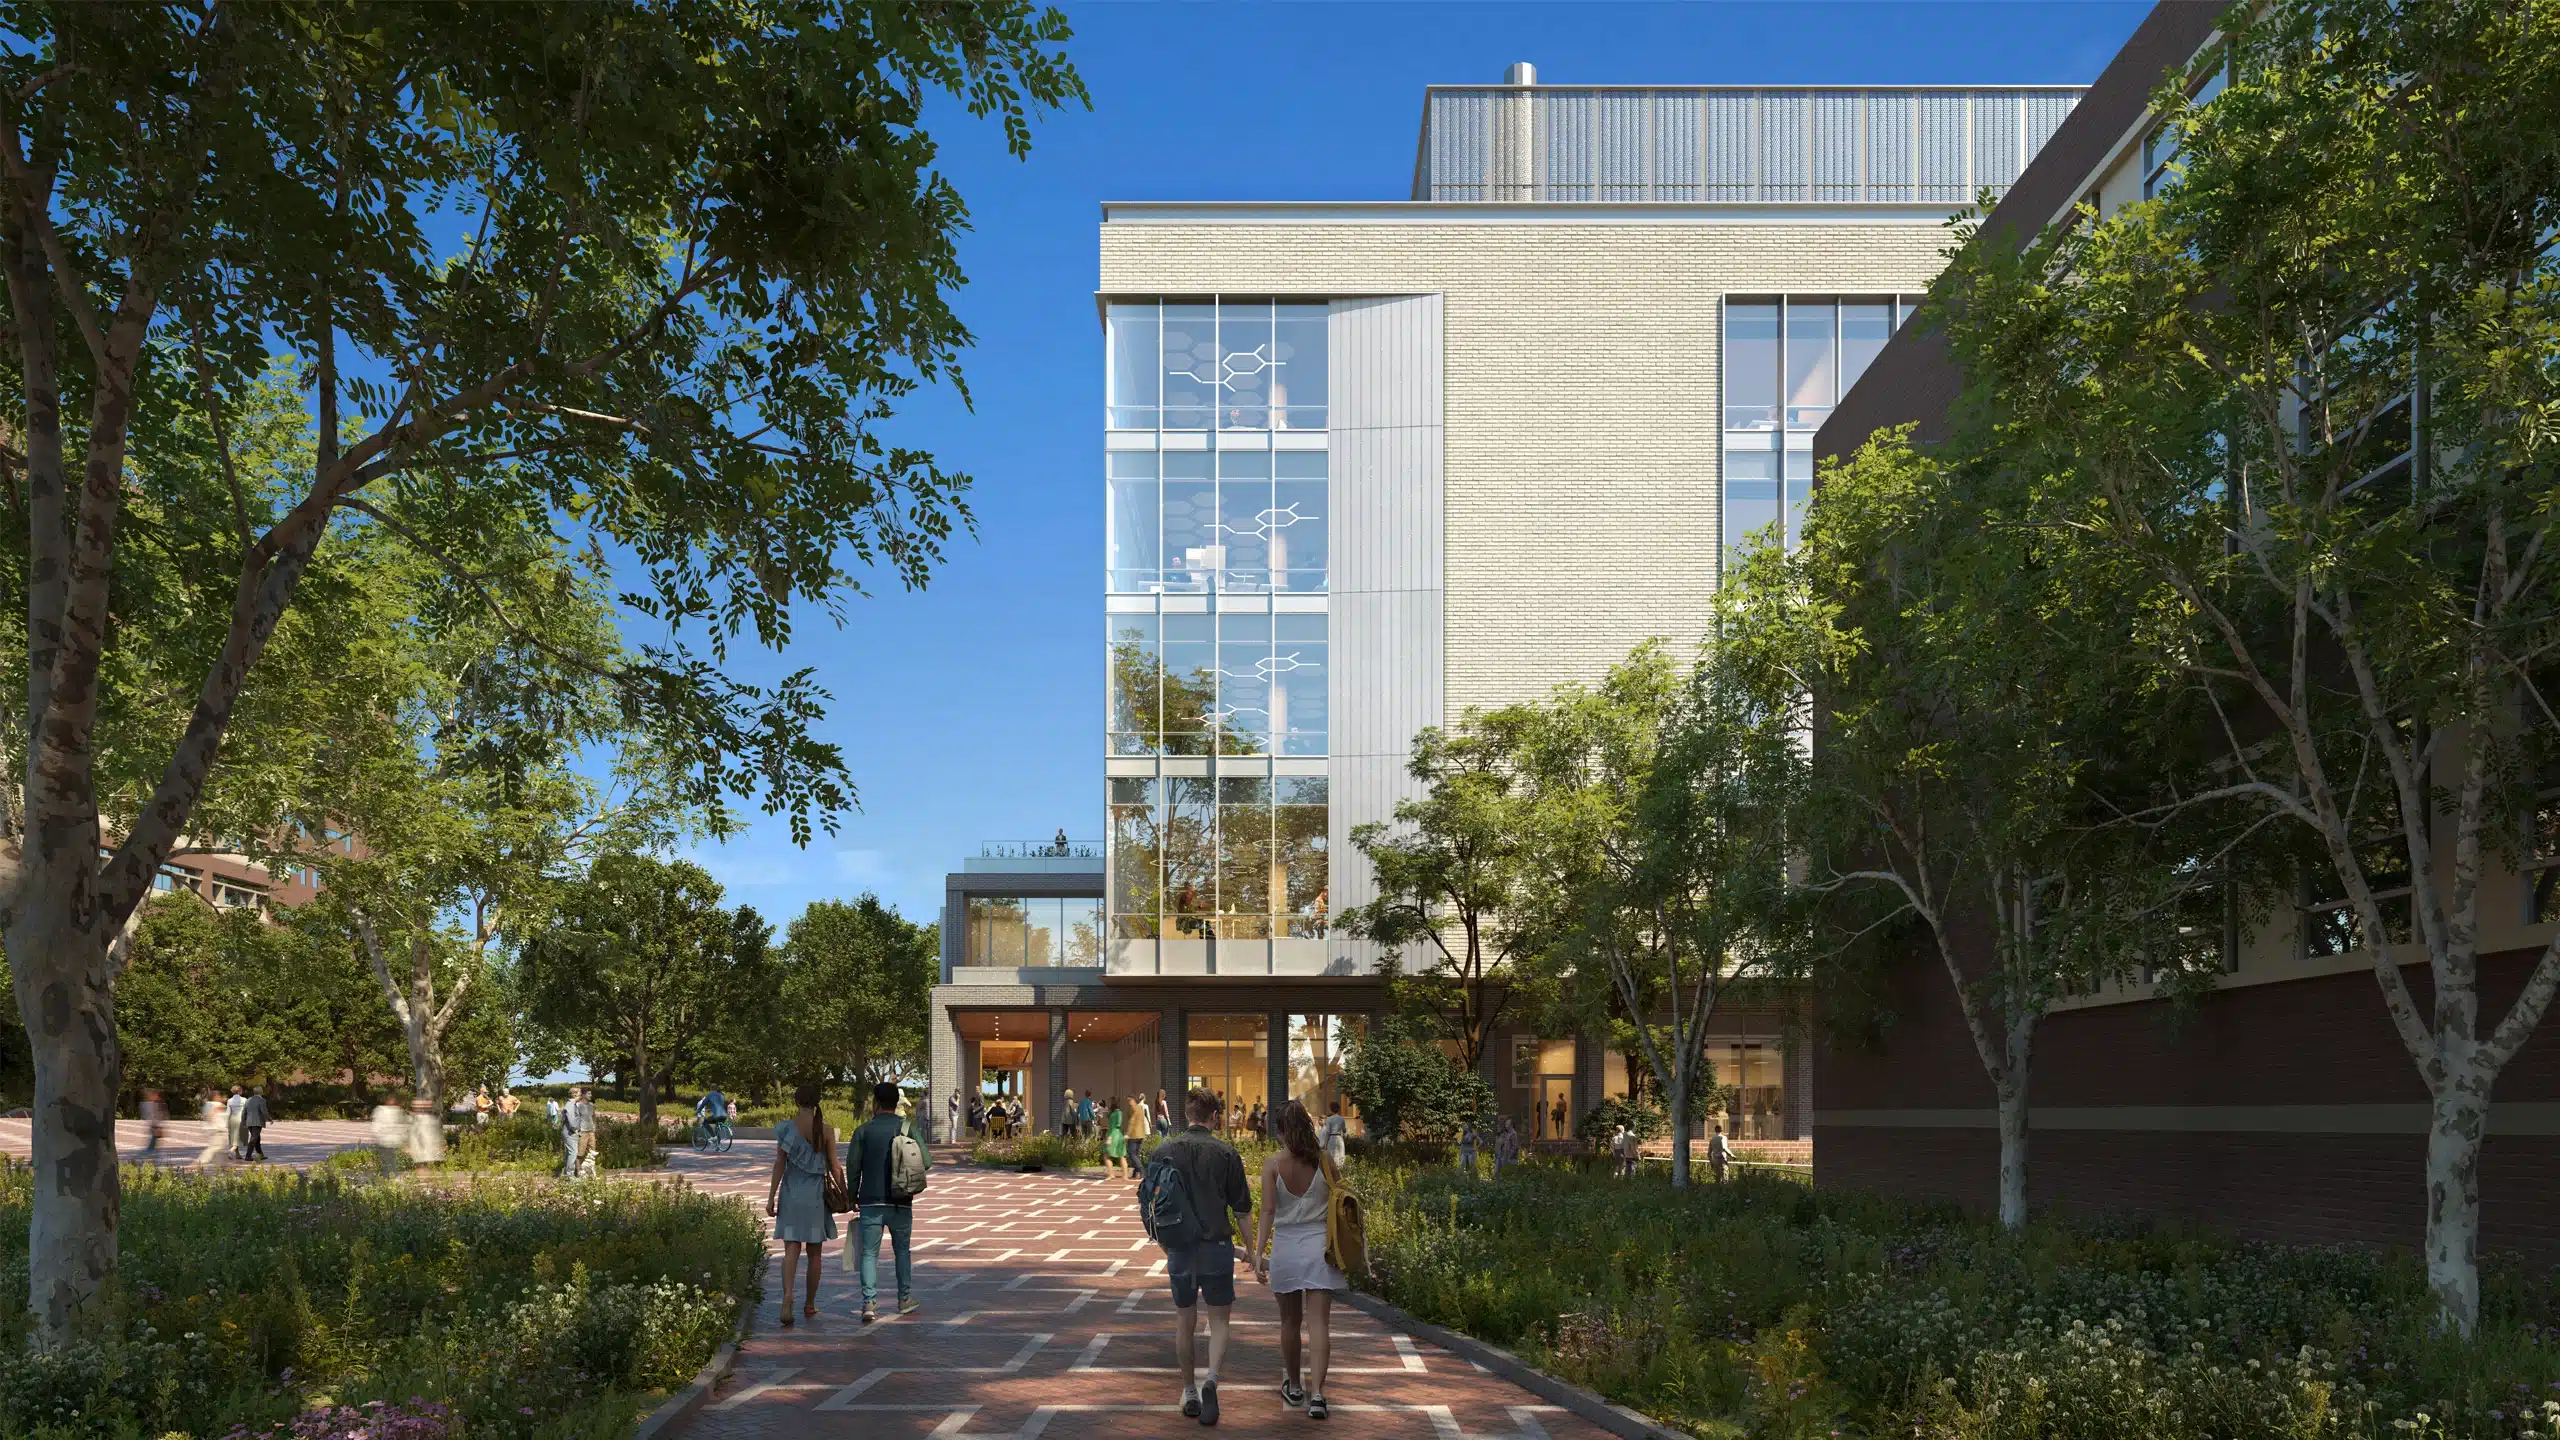 An architectural rendering showing people walking around the exterior of the new Integrative Sciences Building.